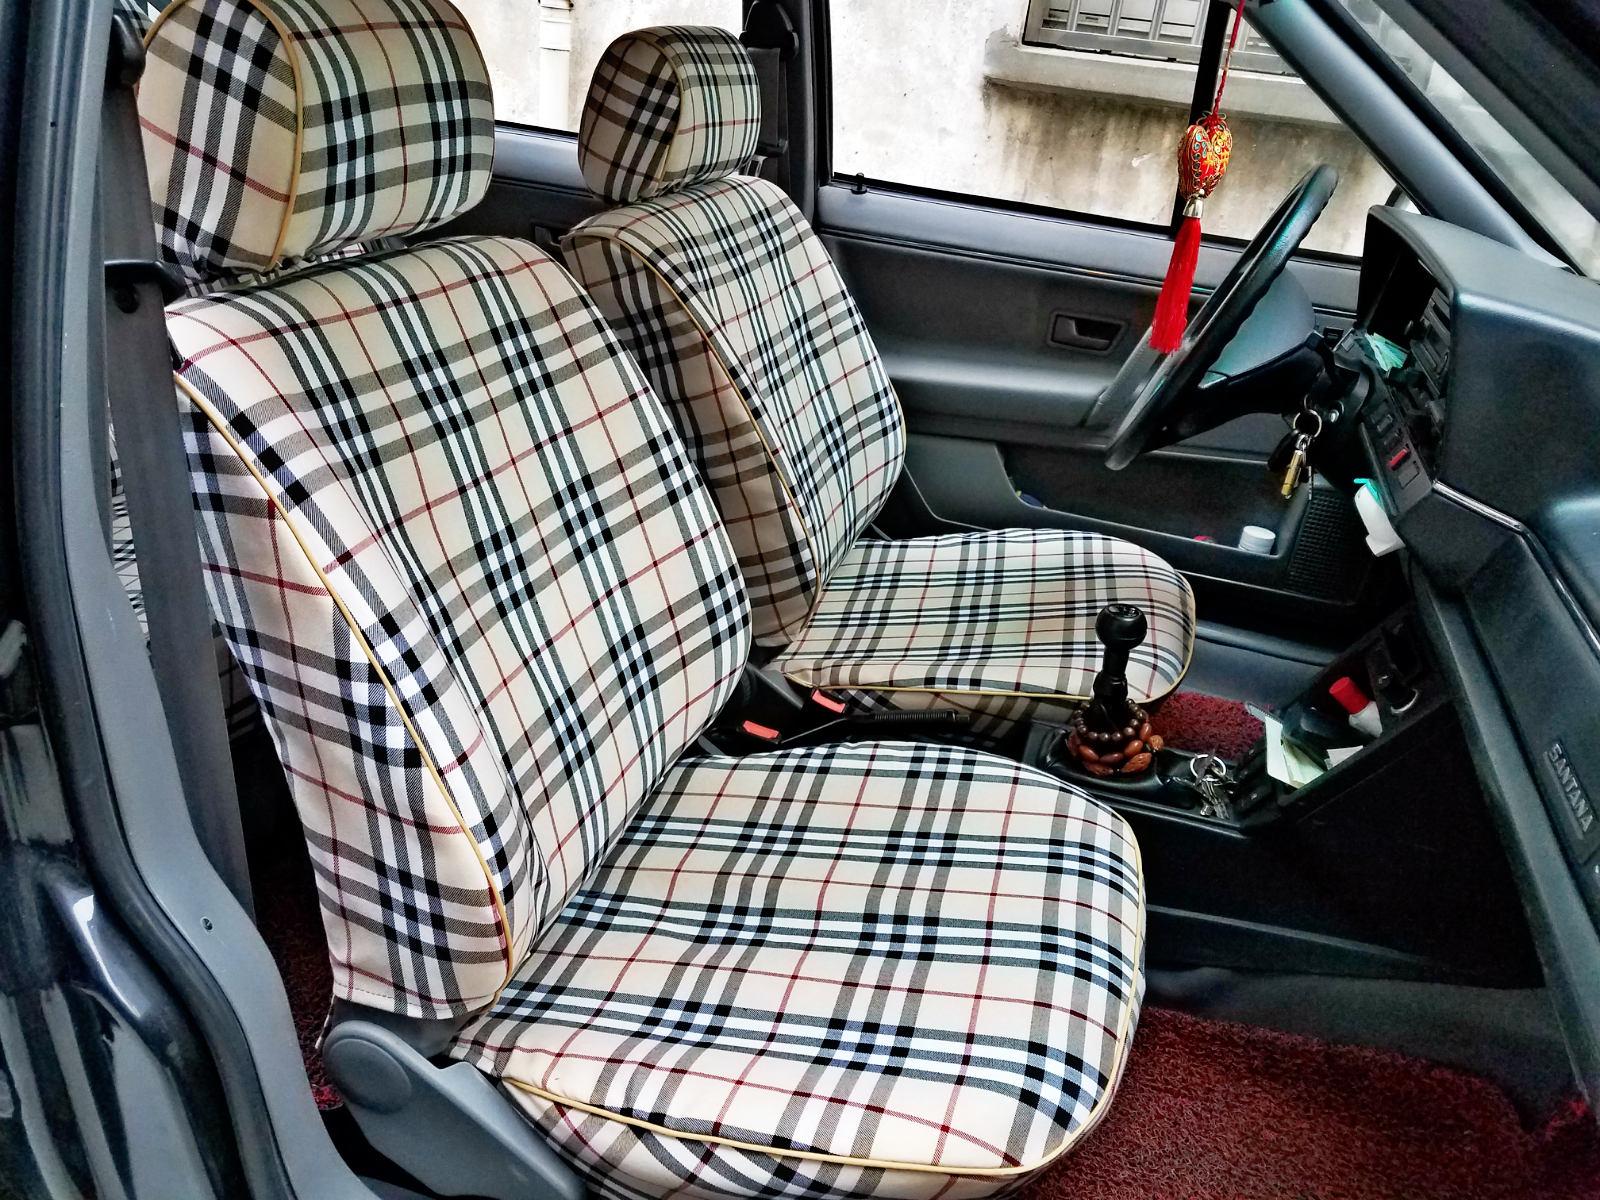 Santana Jetta car seat covers all special car special fabric. All models can be customized for special delivery.